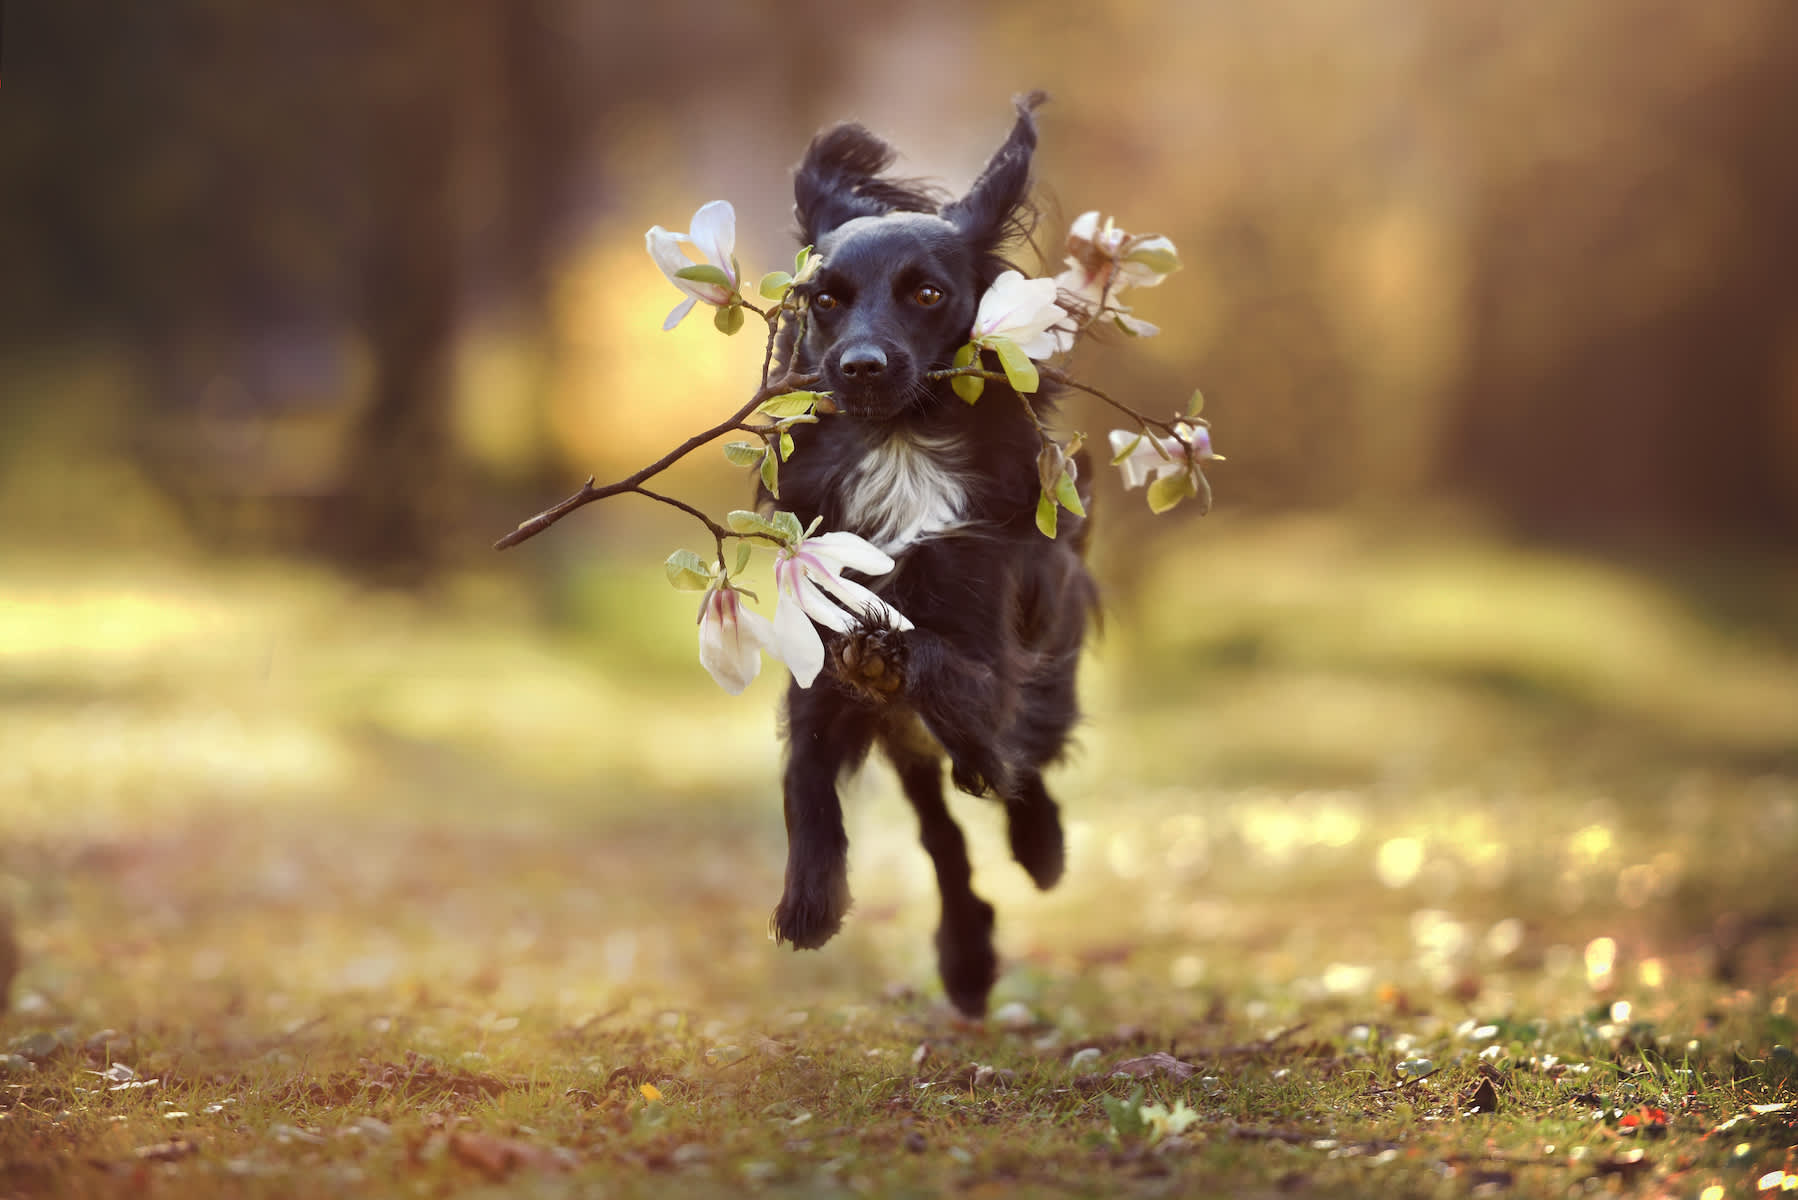 Canva - Dog Running with Flowers in His Mouth